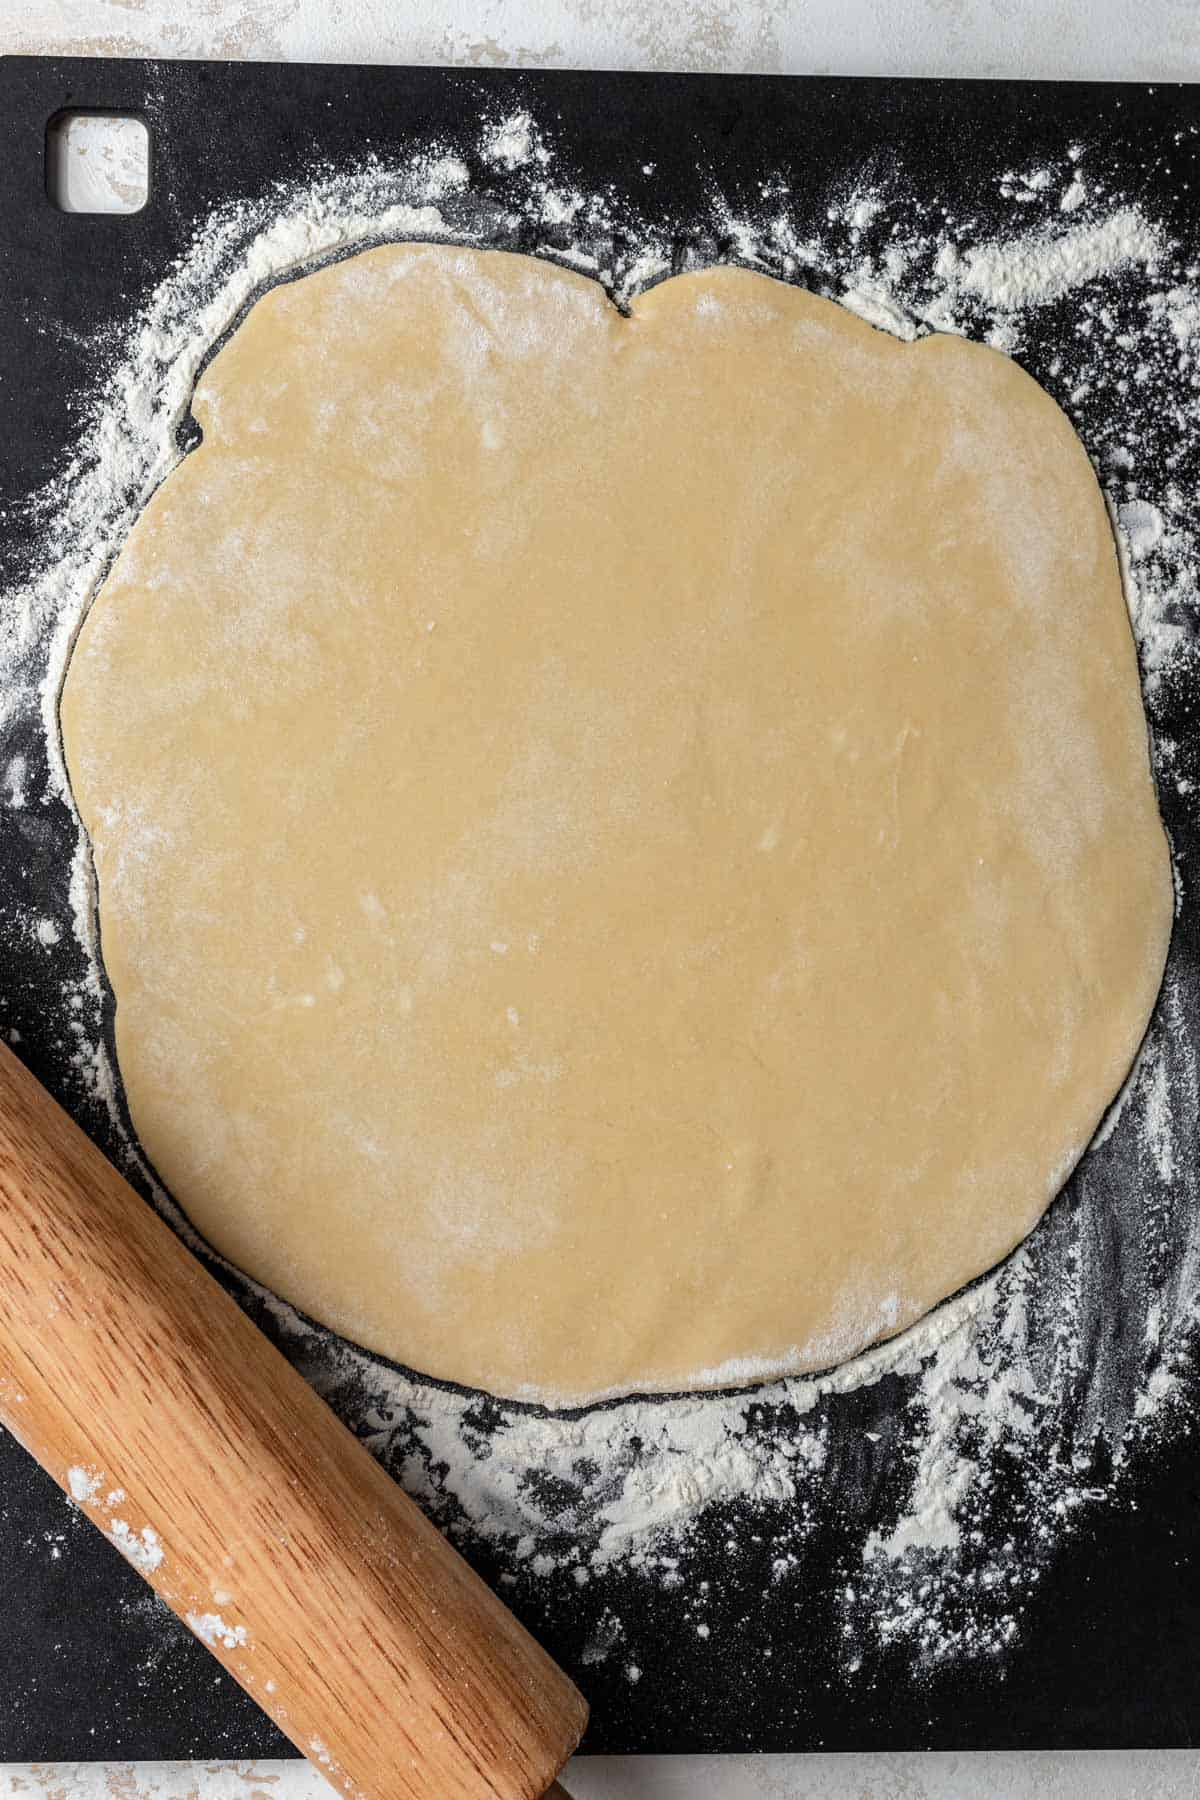 Rolled out quiche dough on a floured surface.